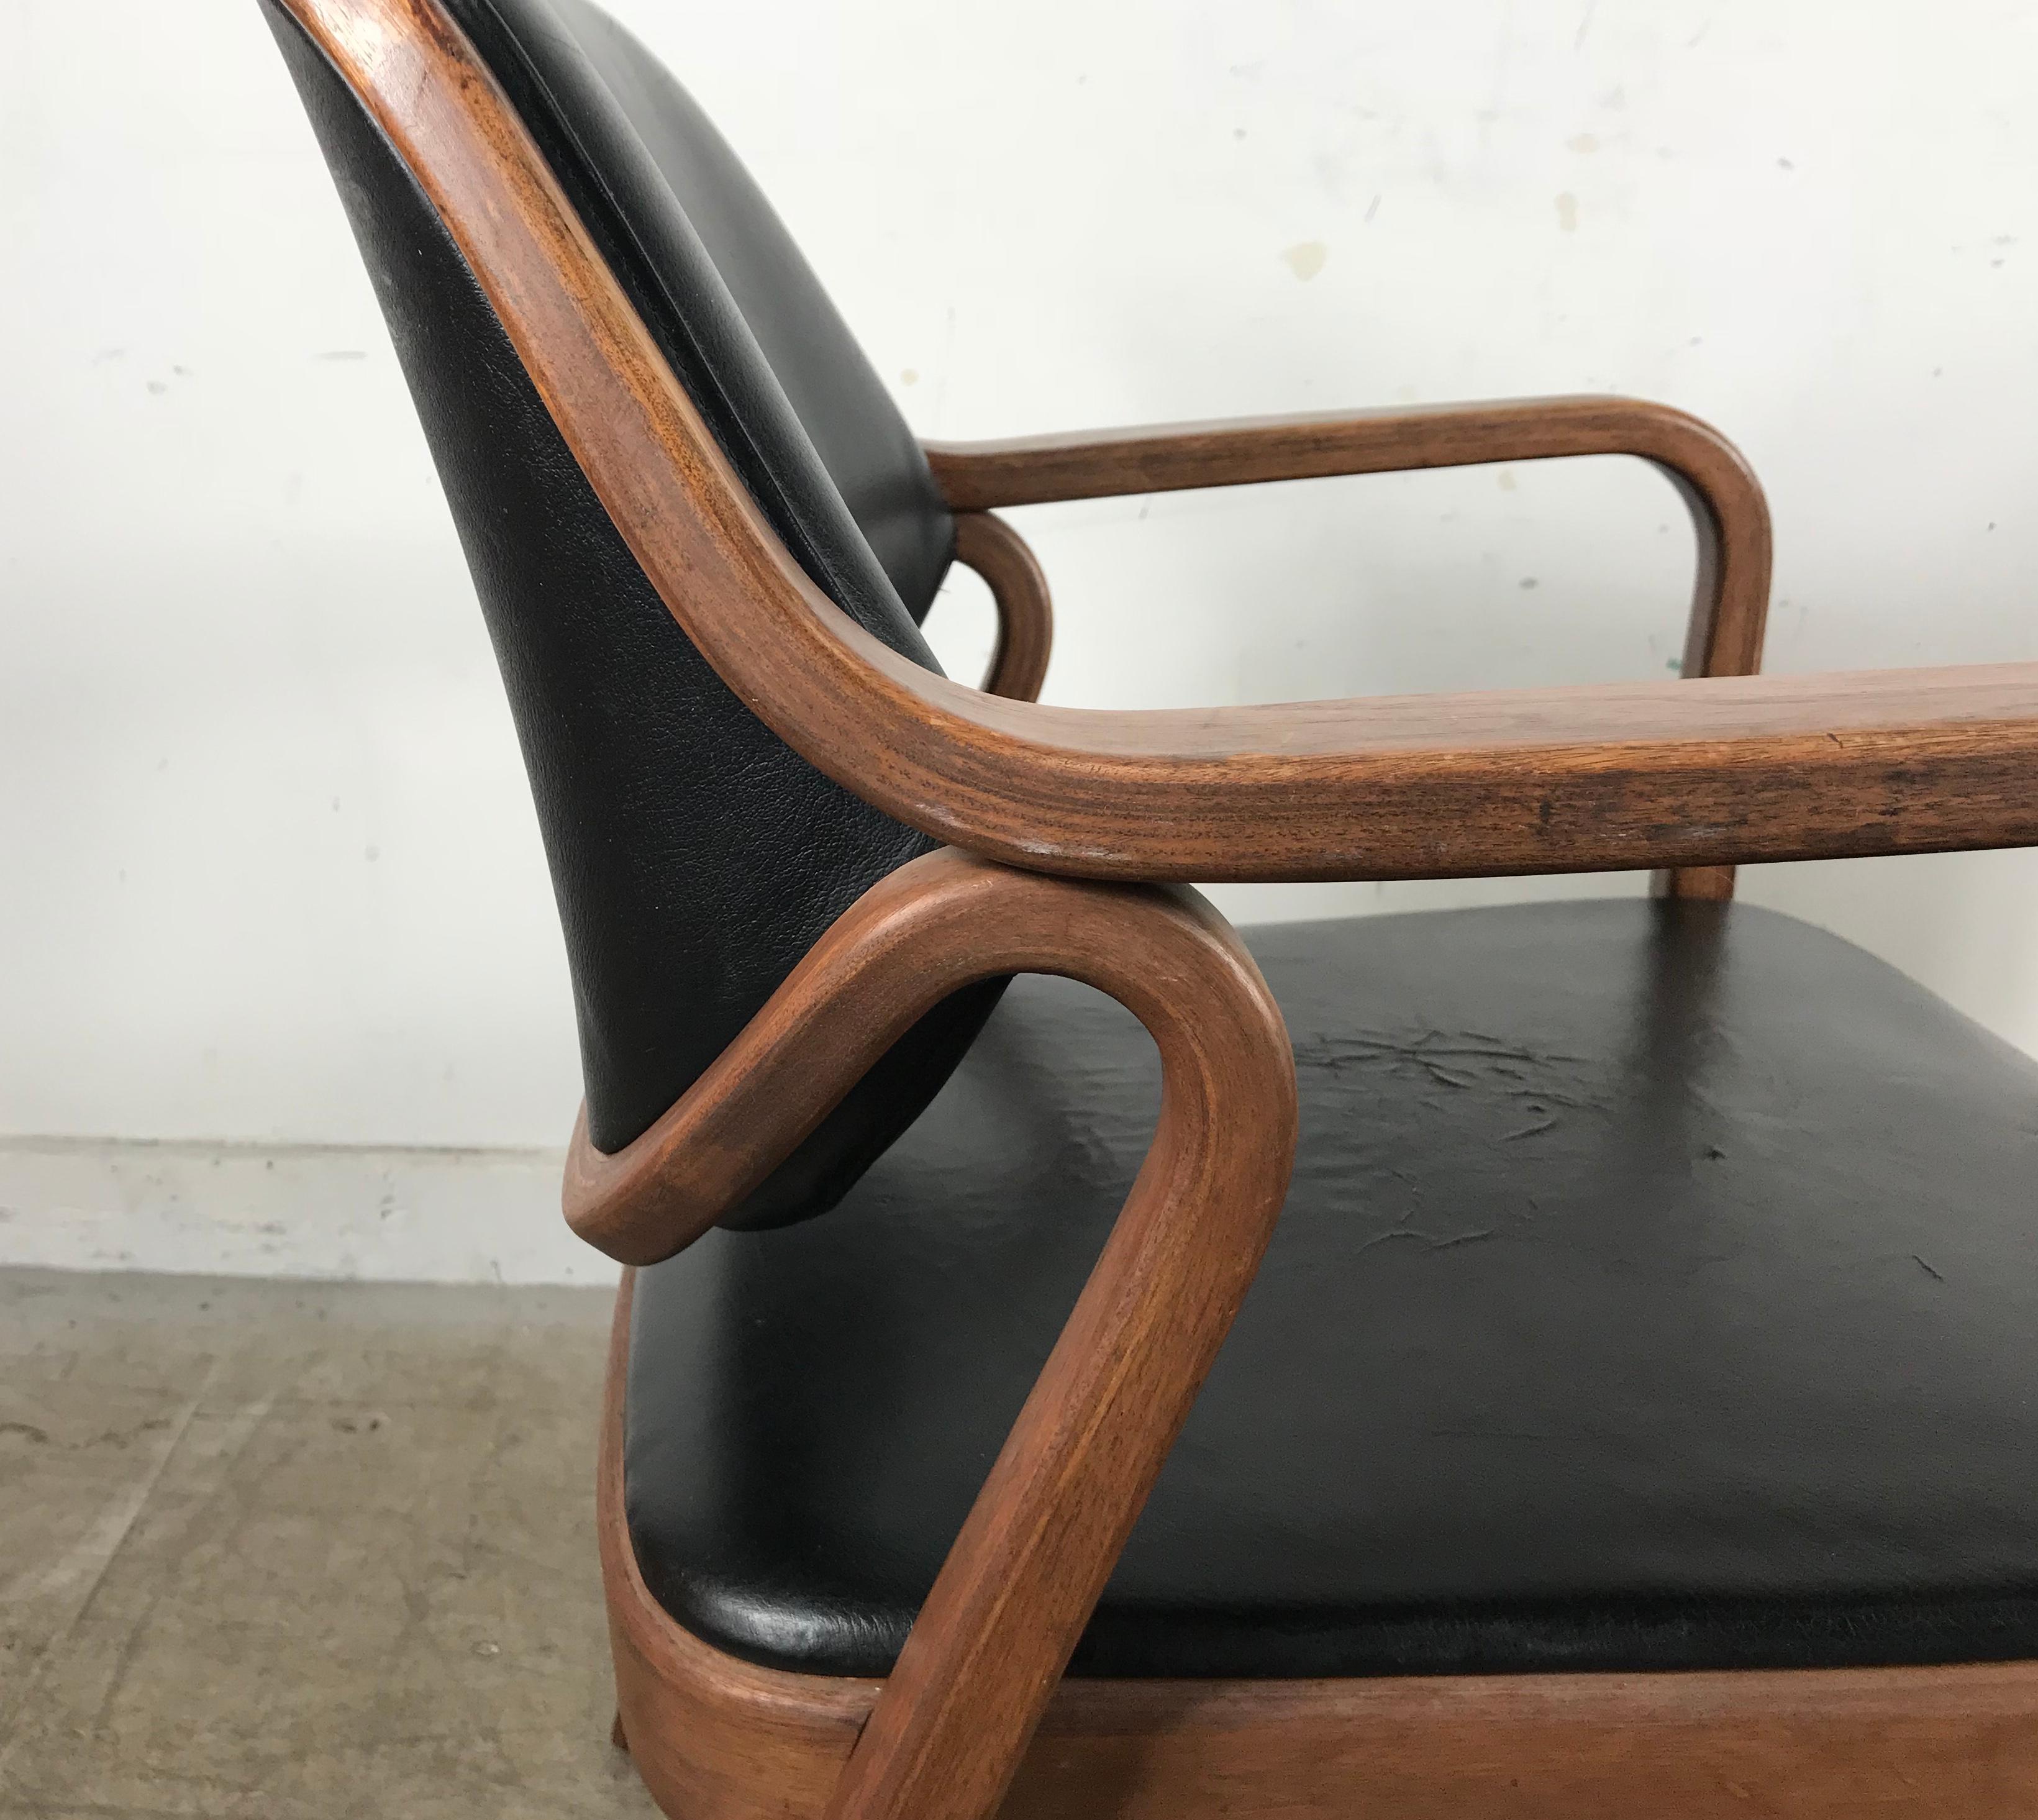 American Pair of Modernist Bentwood Mahogany and Leather Chairs by Don Pettit for Knoll